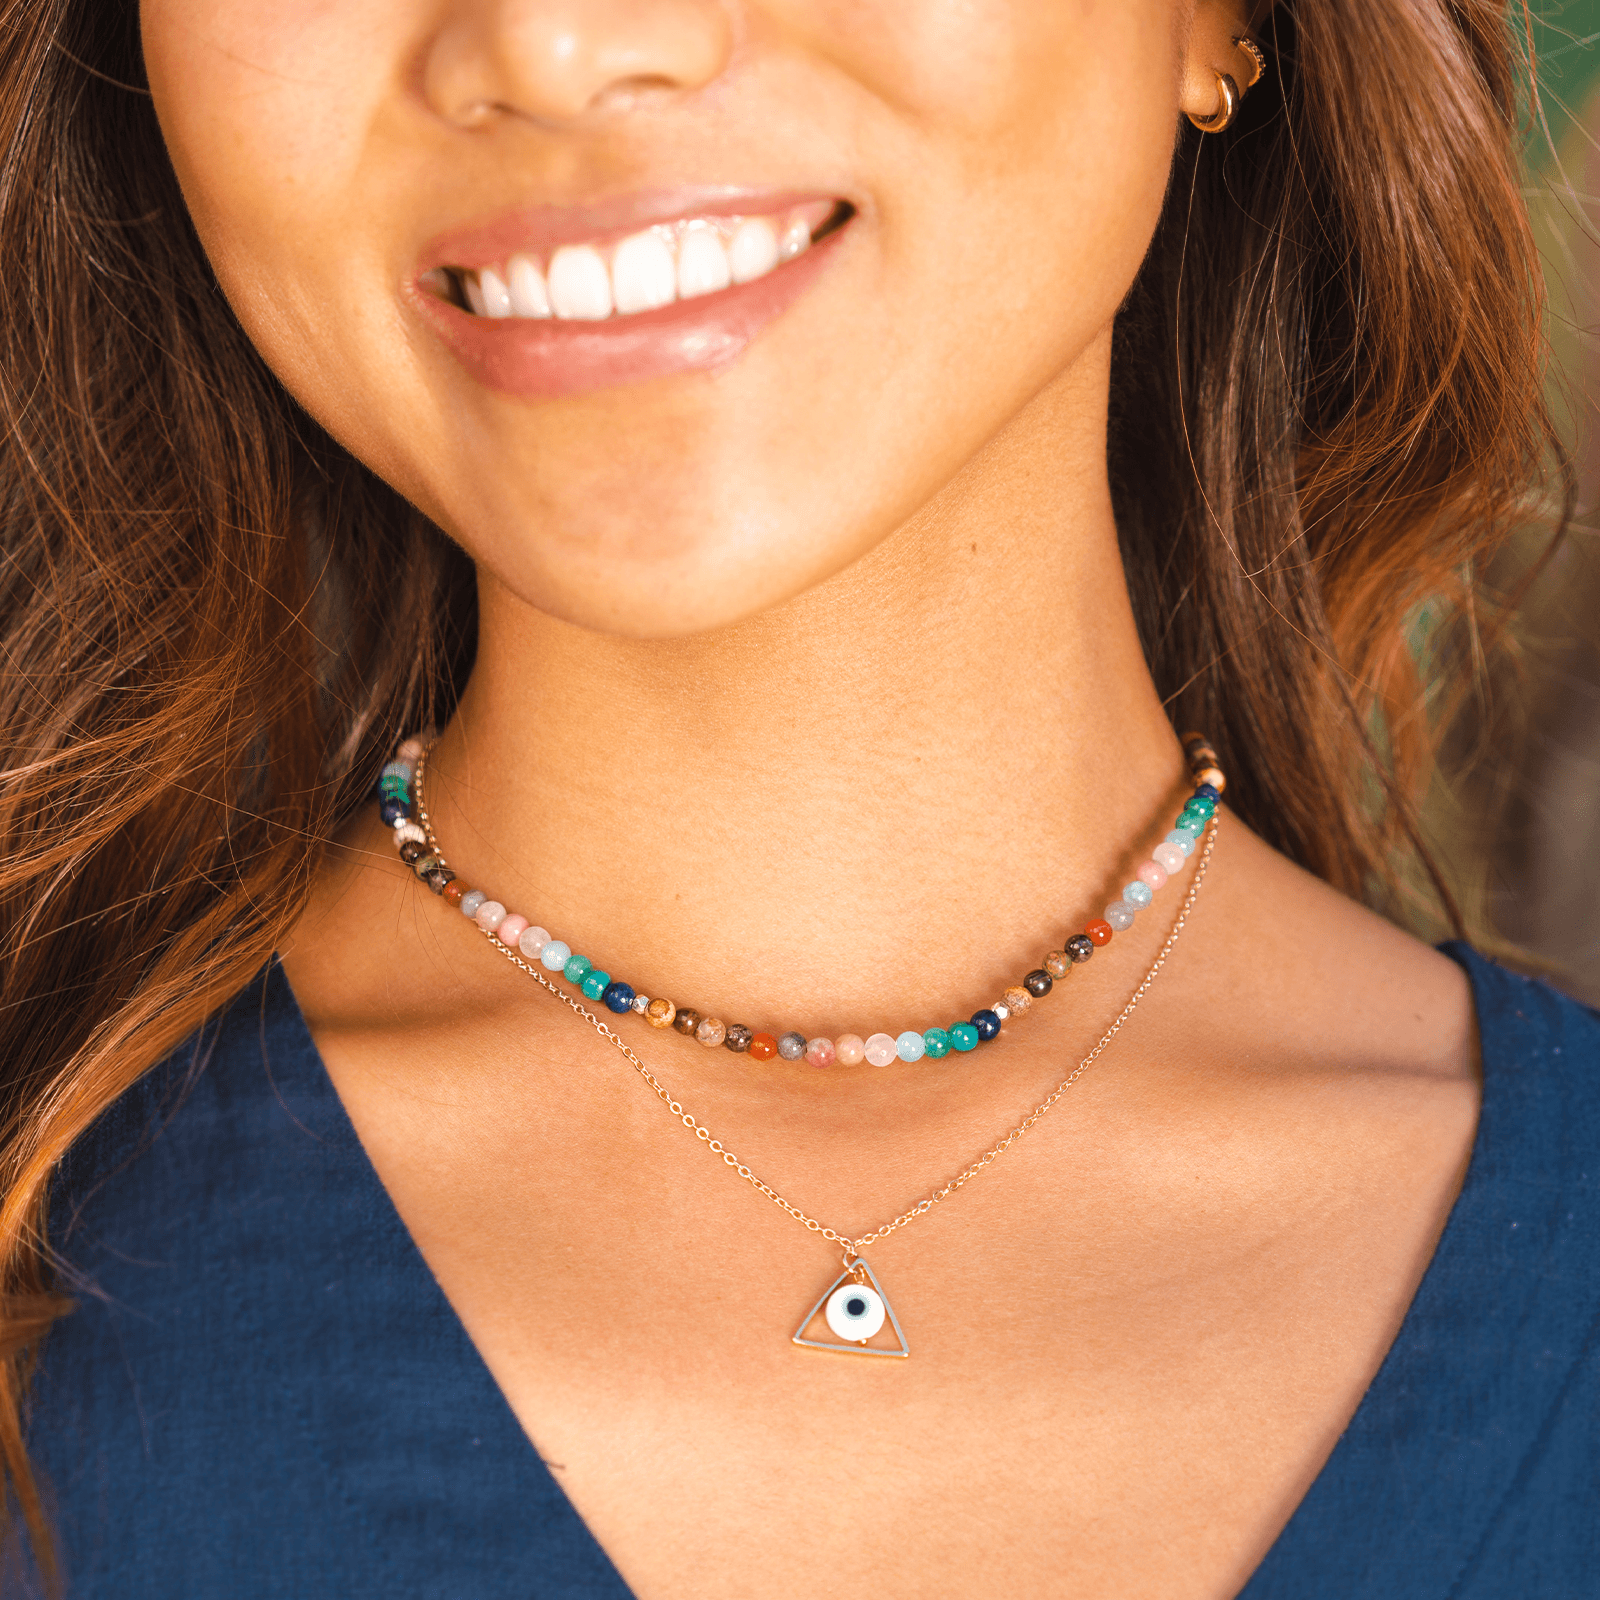 Model wearing a stack of two necklaces. The necklaces include a 4mm multicolor stone healing necklace and a evil eye necklace on a gold chain